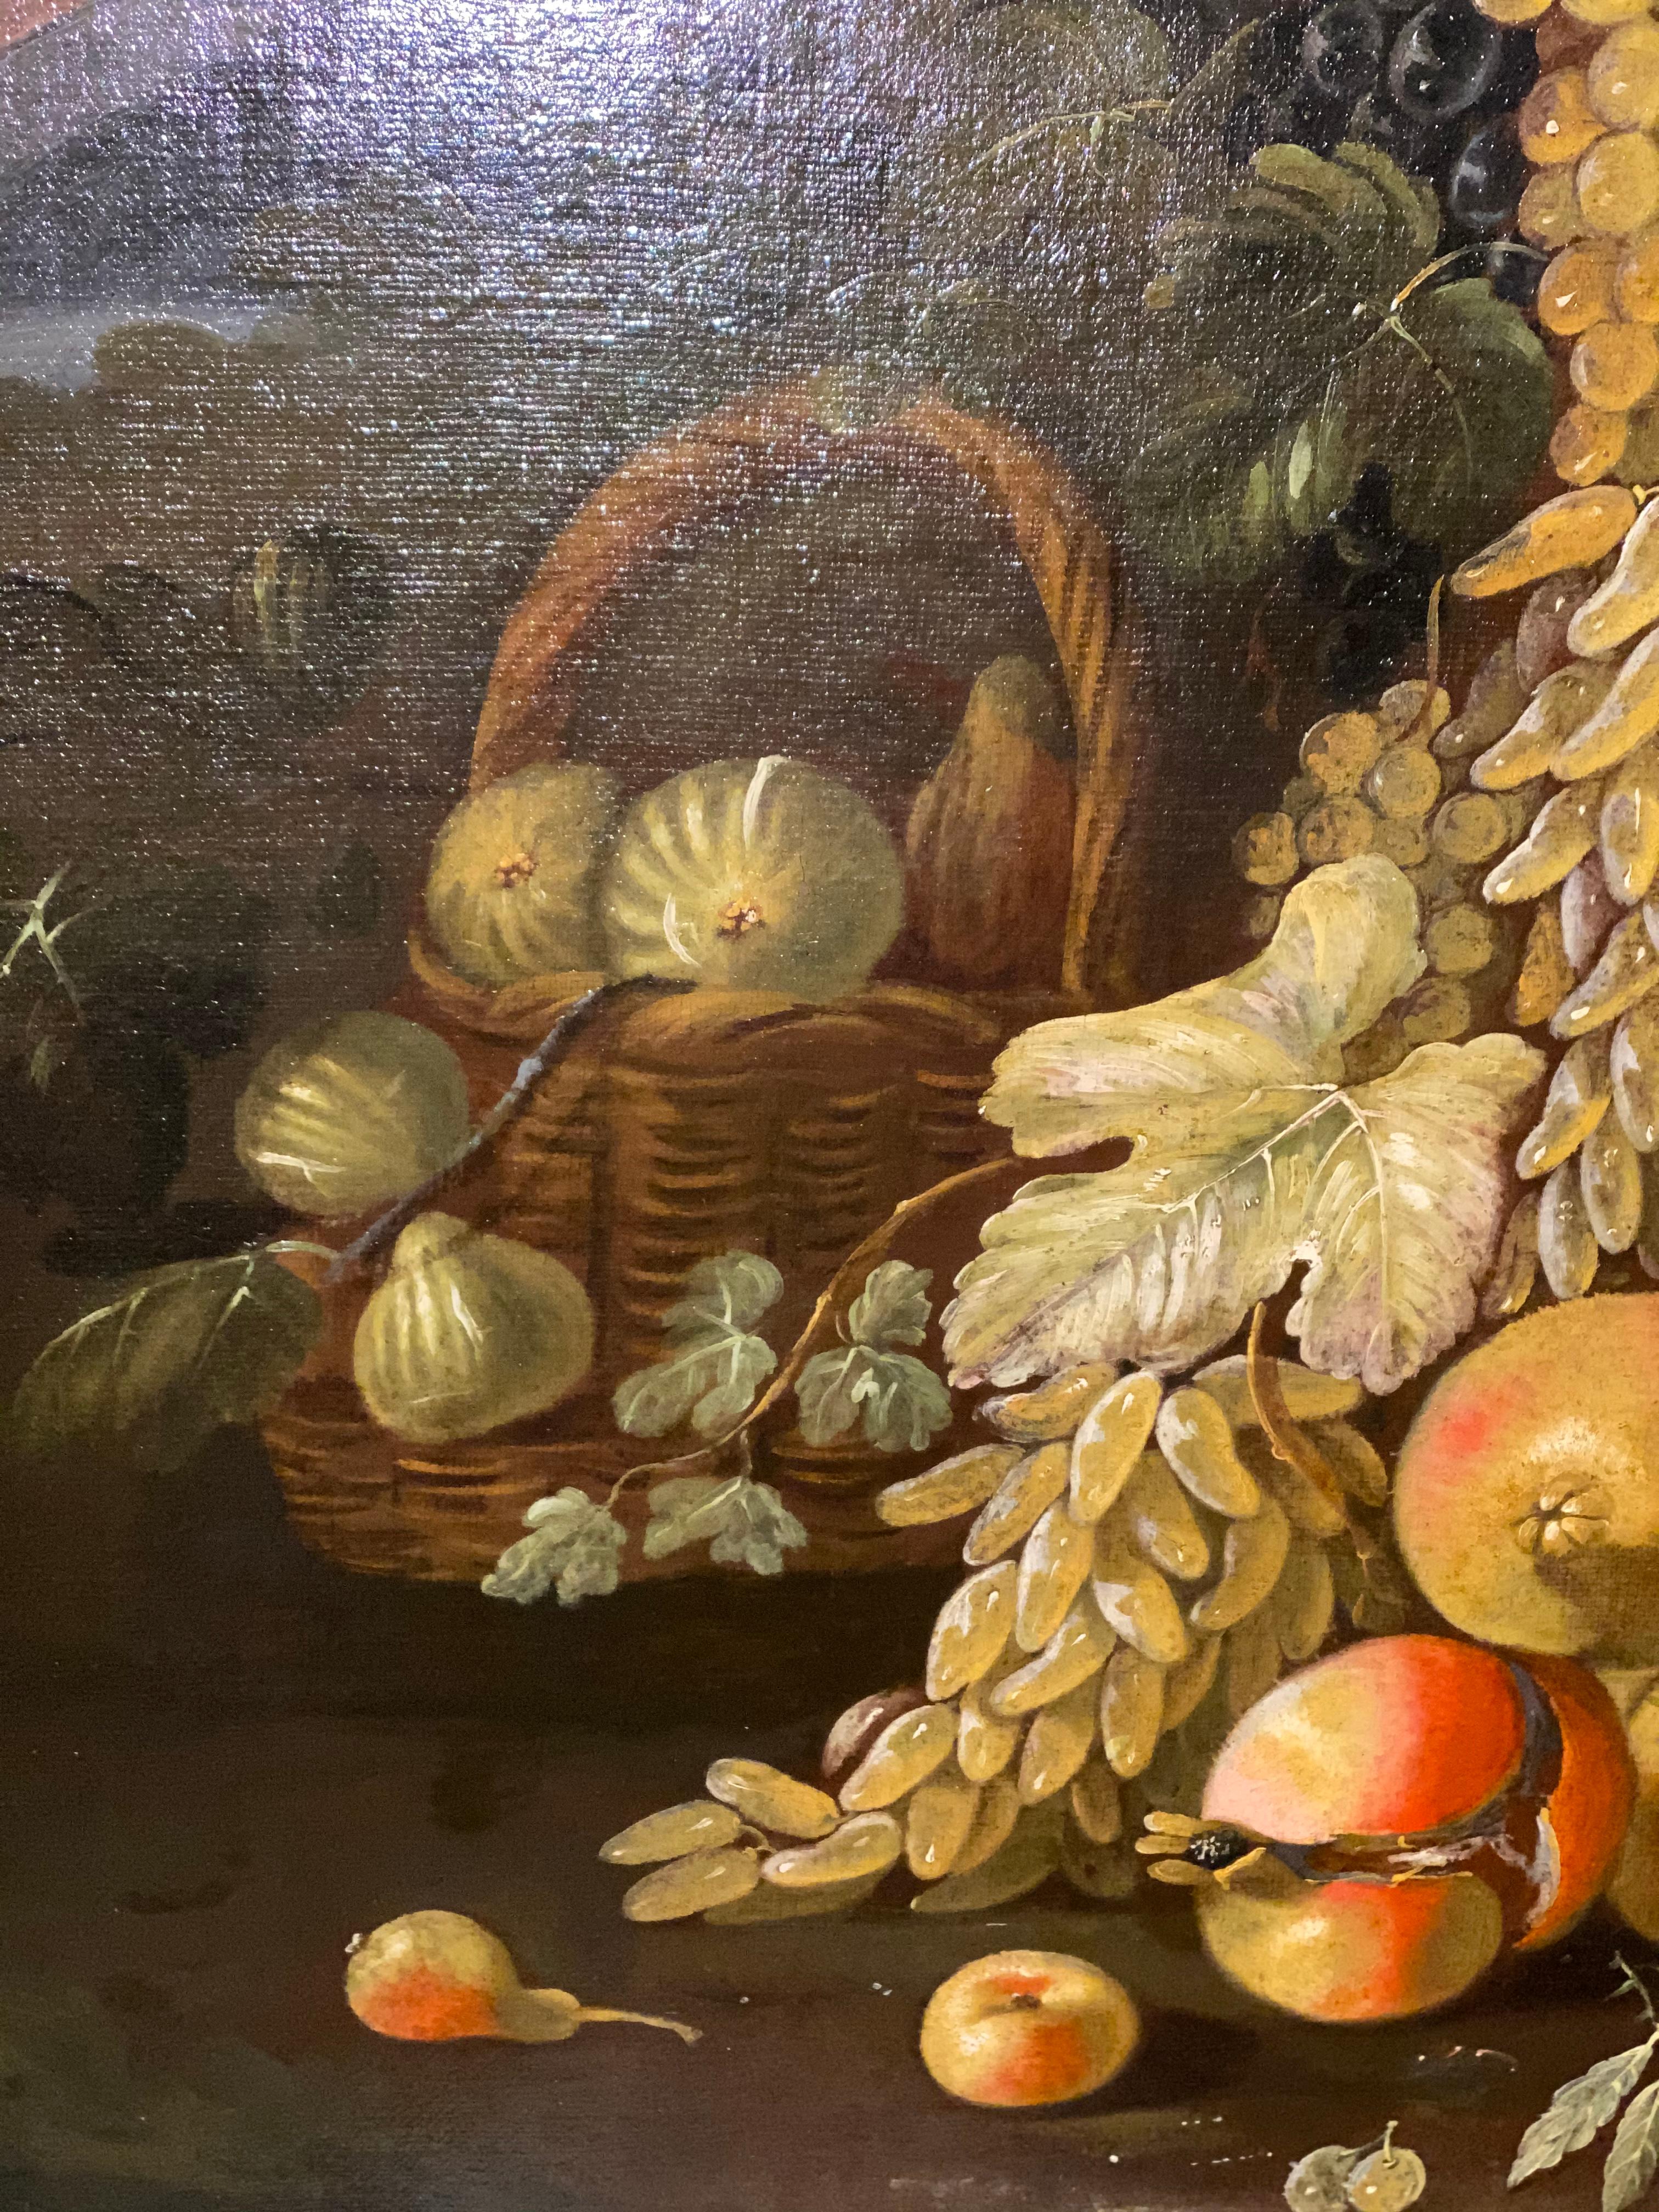 Pair of Exceptional Italian 17th Century Still-Life Paintings  2